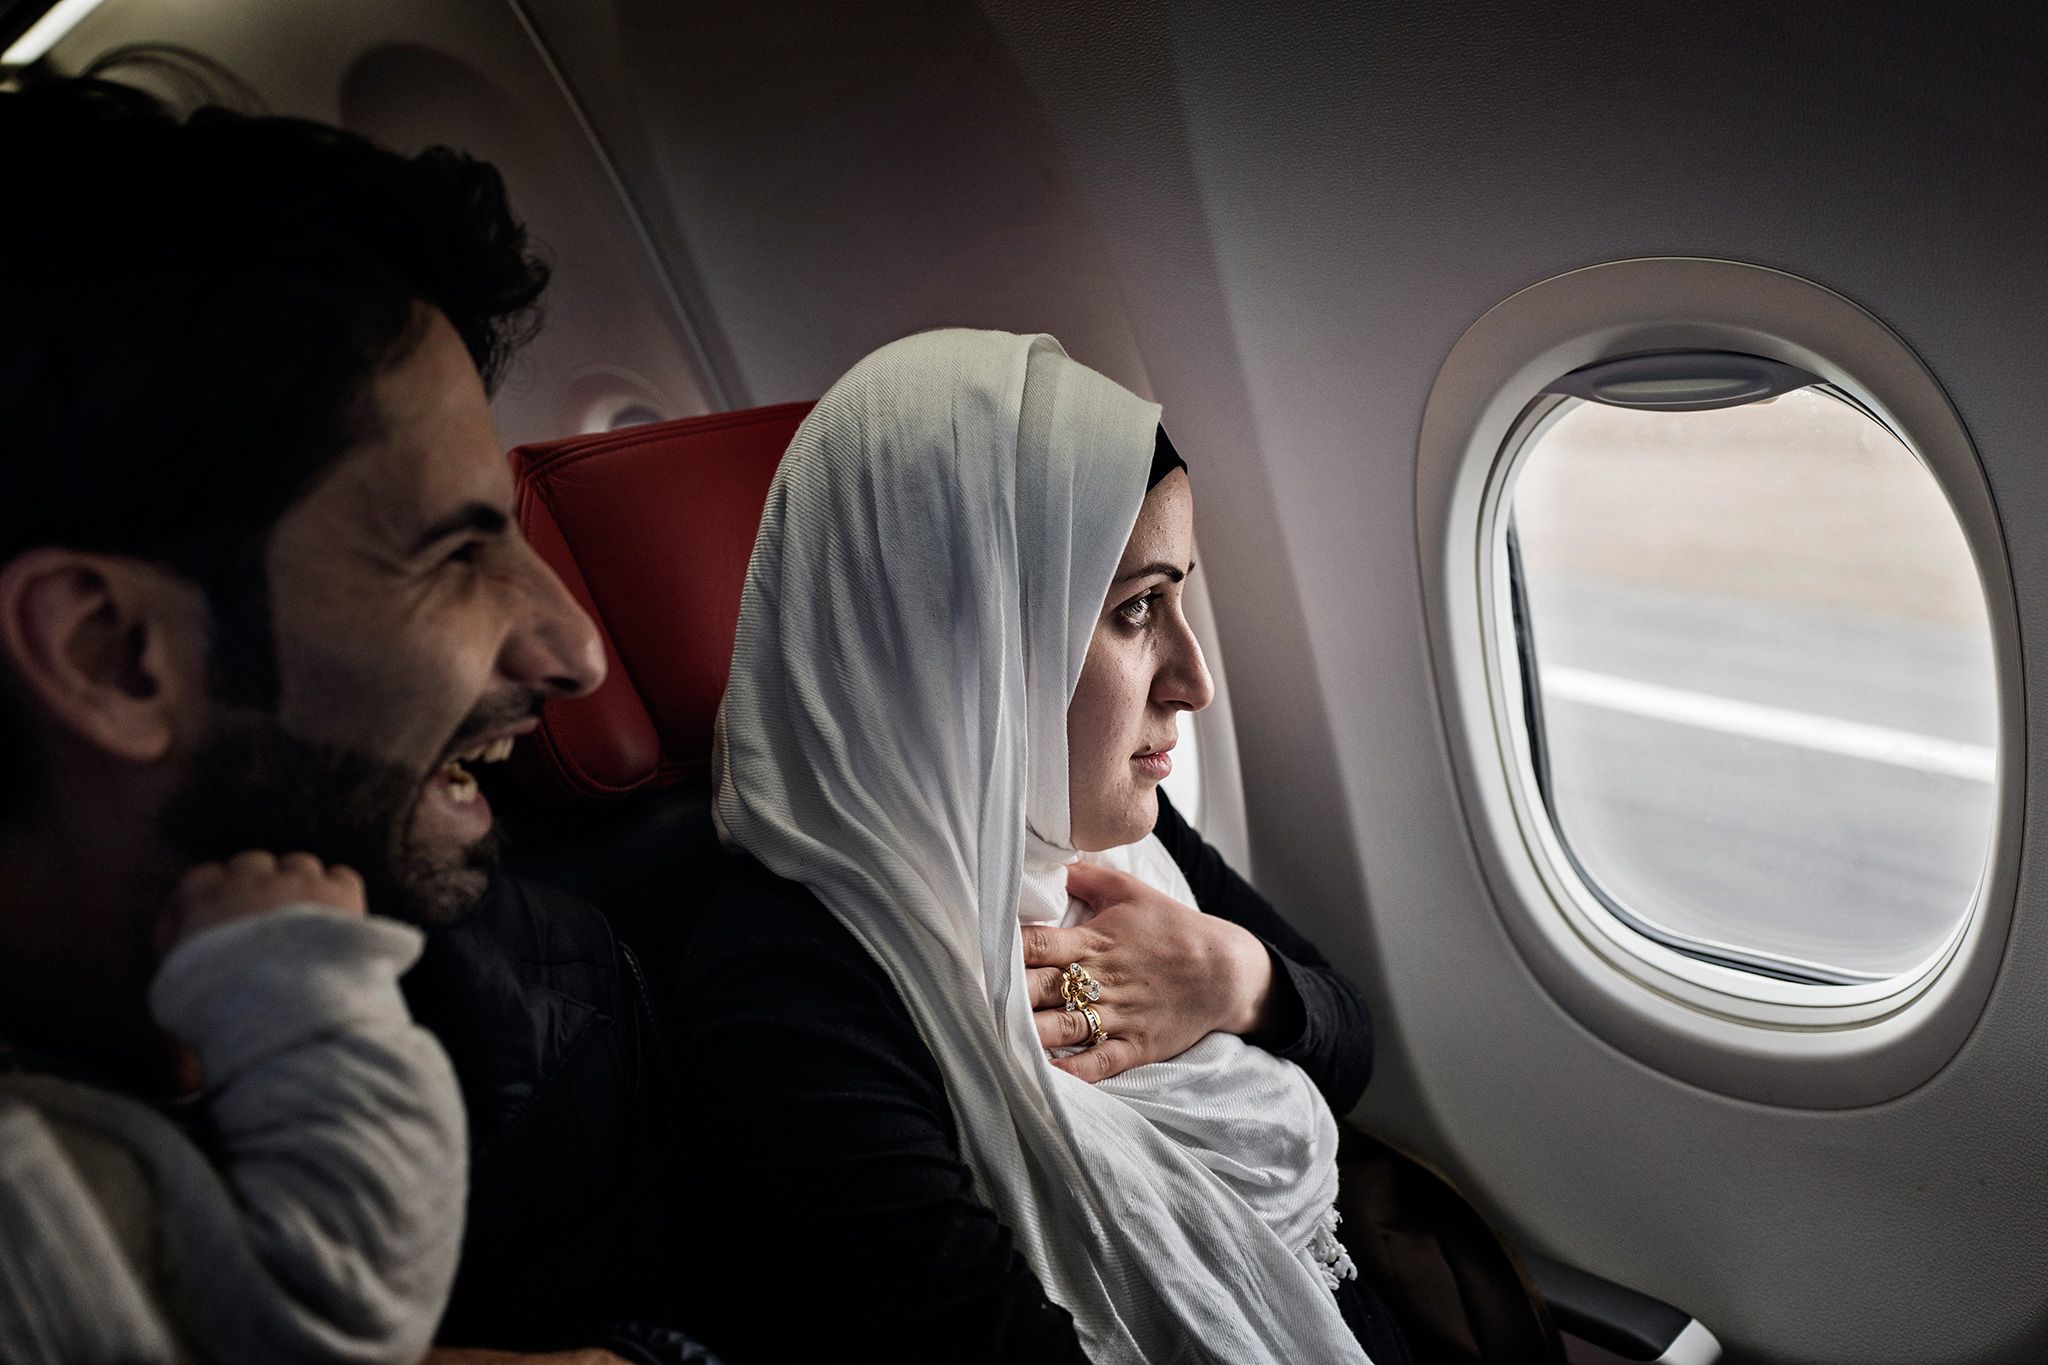 Syrian refugees Taimaa Abzali and her husband Muhanned Abzali, look out the window with a mix of fear and excitement as they see Estonia from the air for the first time. Image by Lynsey Addario. Estonia, 2017.